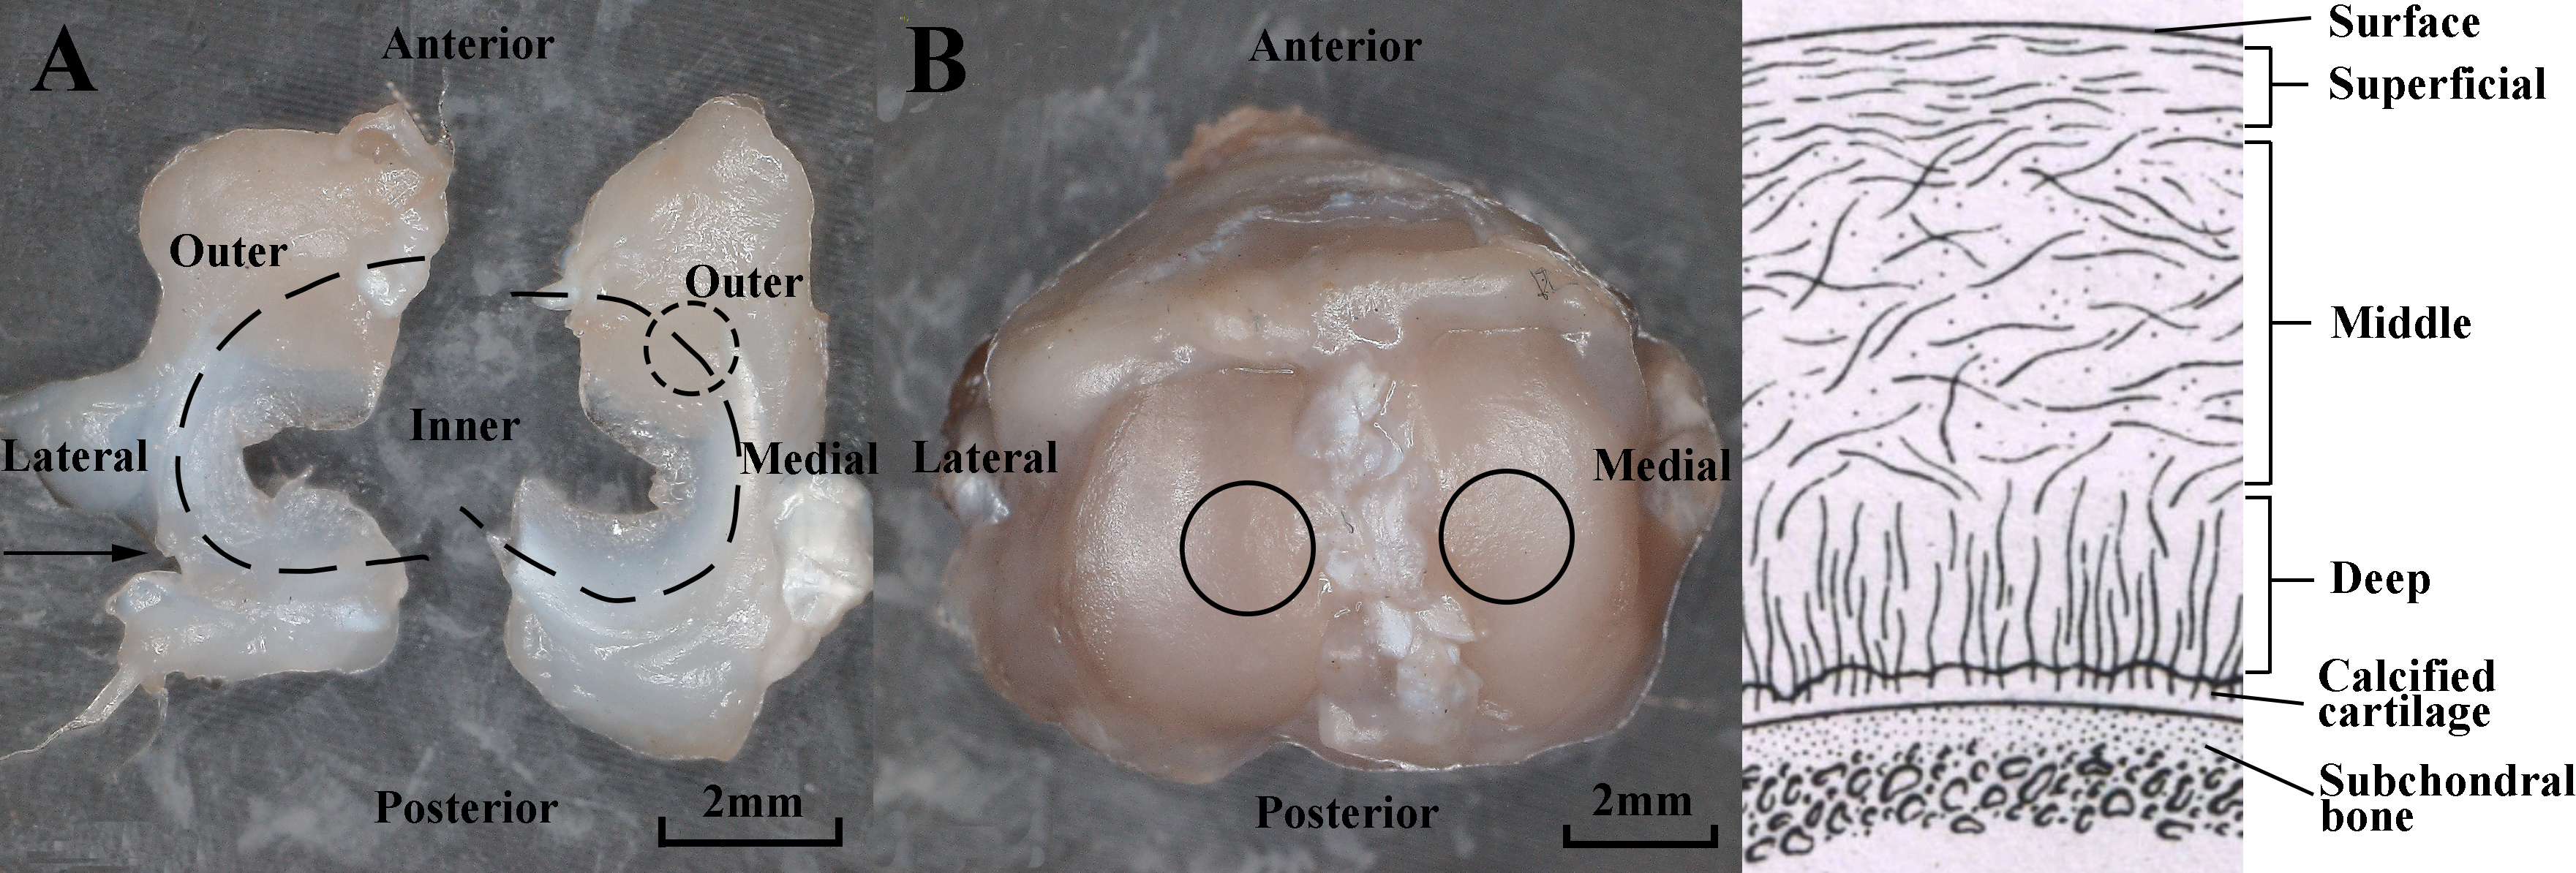 Regional division of menisci and tibial cartilage. A) Optical image of menisci. Dash line circled area shows the typical observed region of menisci. B) Optical image of tibial plateaus. Solid line circled areas show the typical observed regions of tibial cartilage. C) Cross-sectional schematic of tibial cartilage showing a depth-dependent zone. Arrow in sub-figure A represents the slice direction.